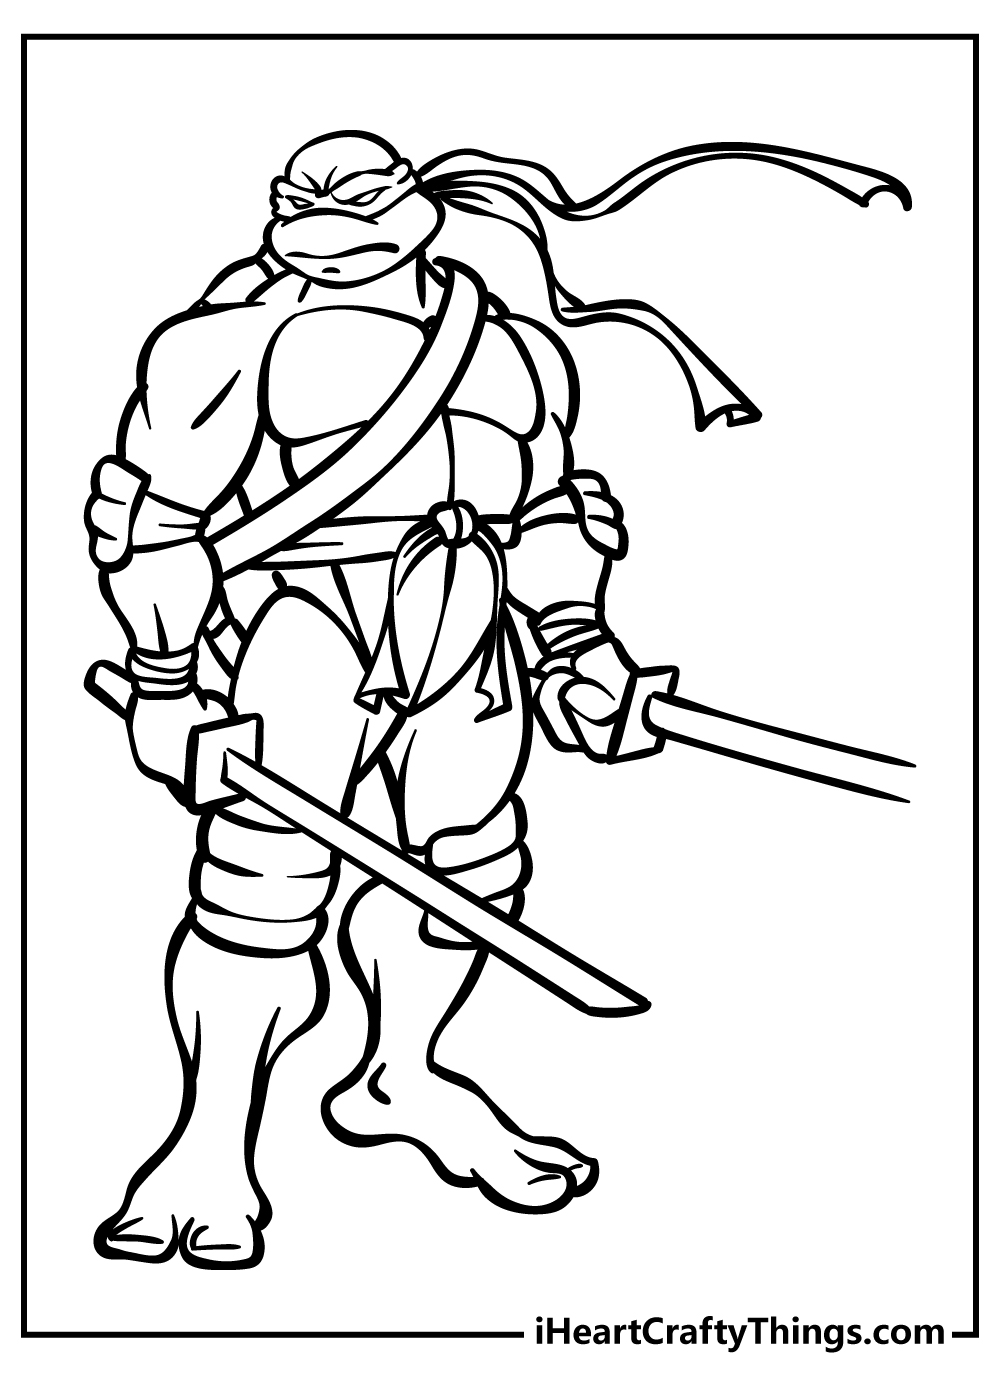 Ninja Turtles Coloring Pages for kids free download